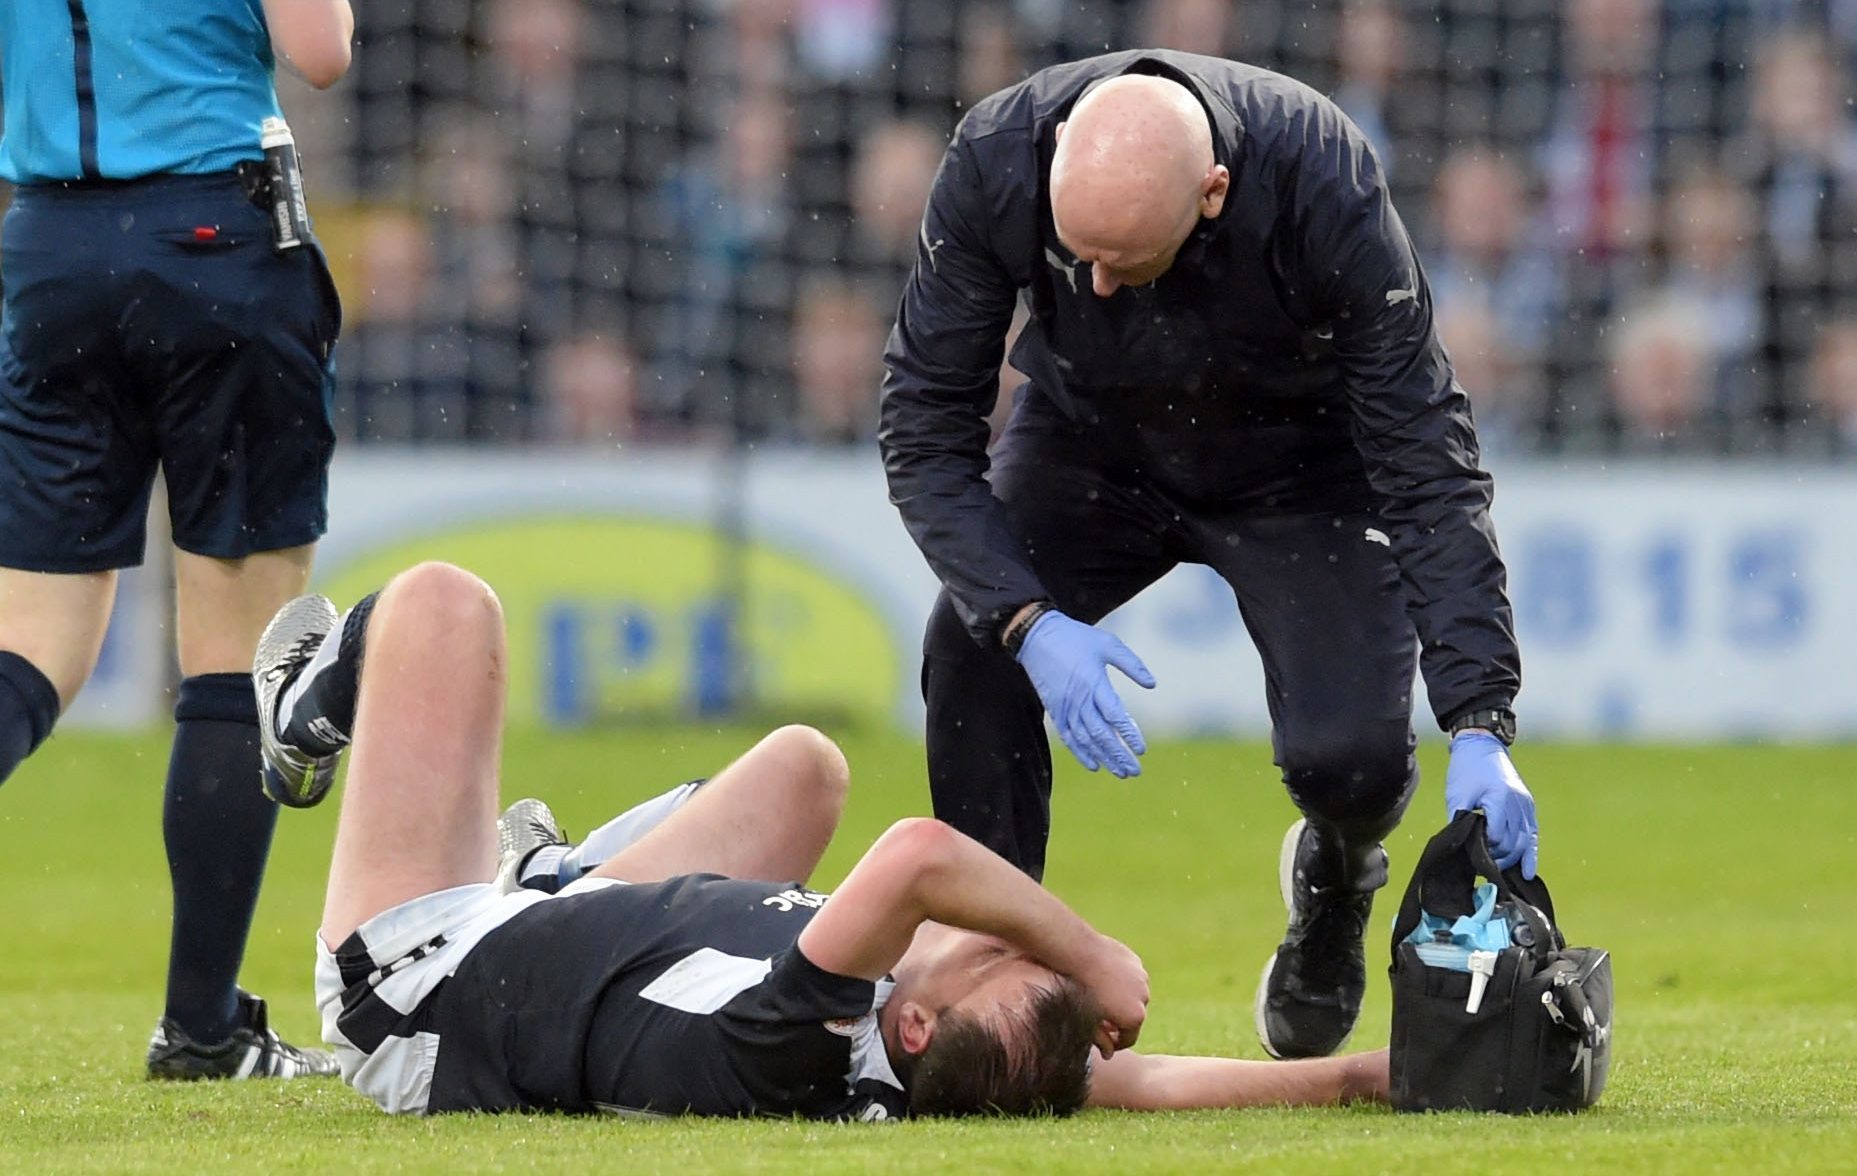 Paul McGowan is injured during the derby.